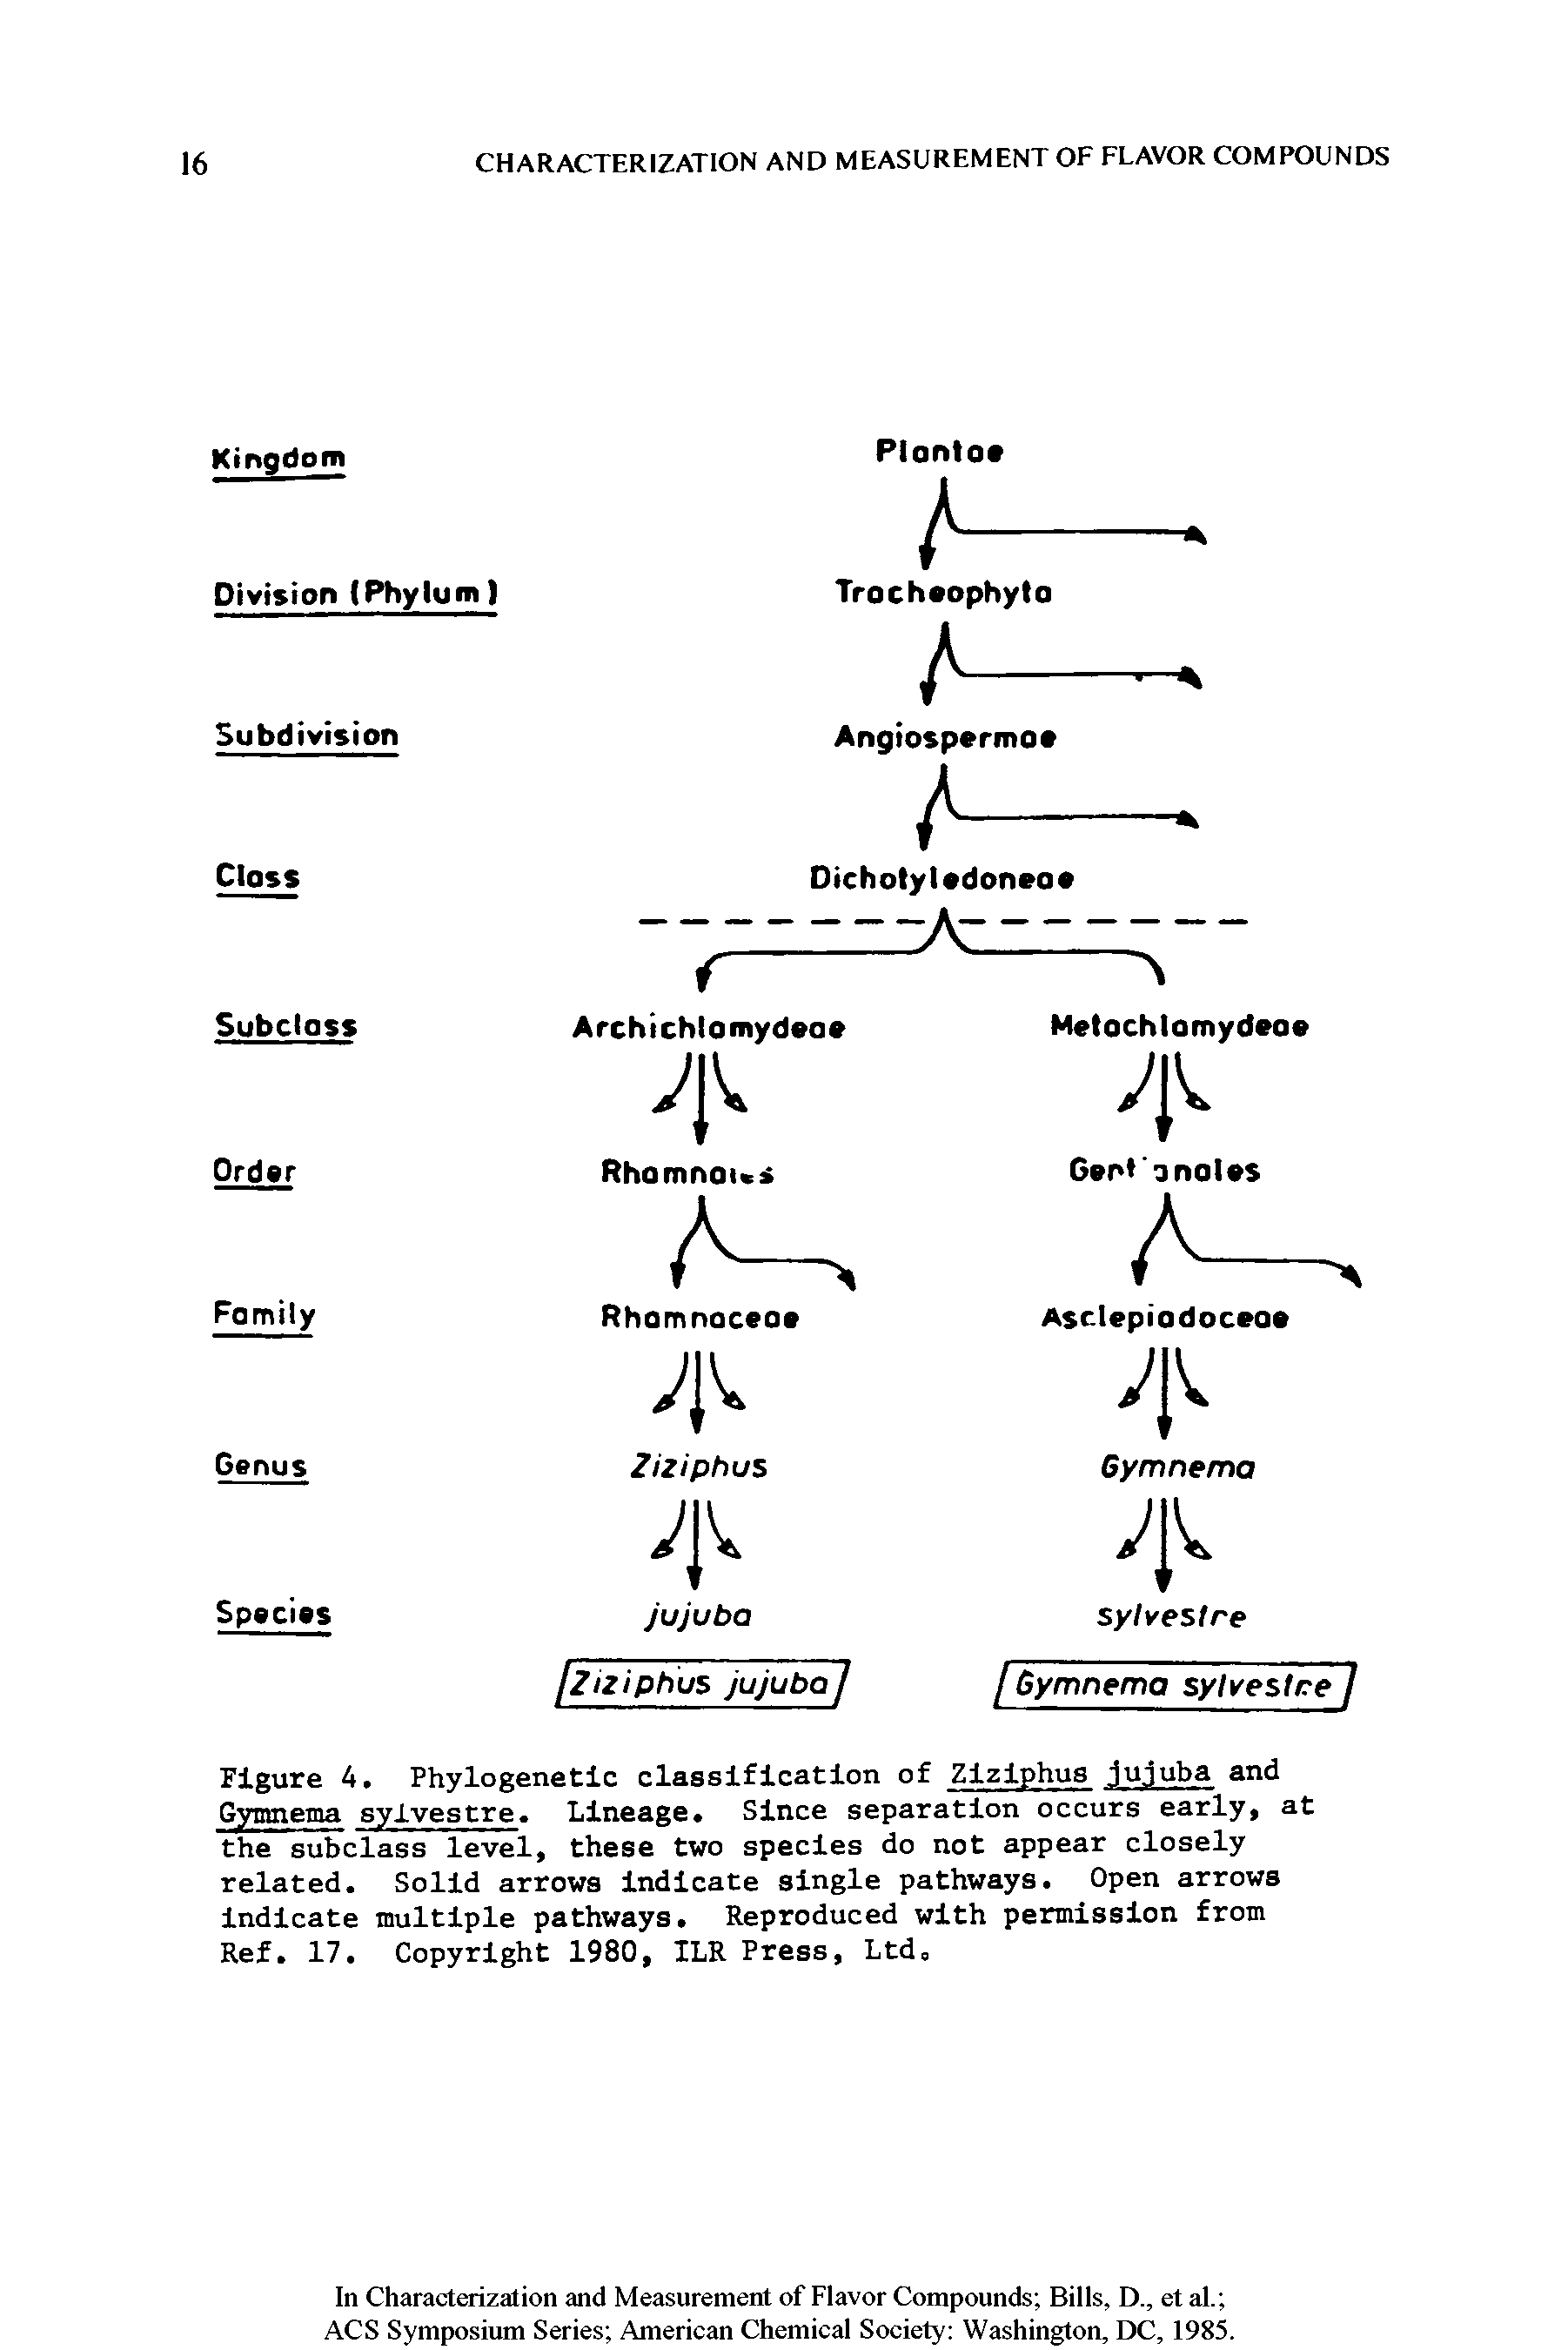 Figure 4. Phylogenetic classification of Ziziphus jujuba and Gymnema sylvestre. Lineage. Since separation occurs early, at the subclass level, these two species do not appear closely related. Solid arrows indicate single pathways. Open arrows indicate multiple pathways. Reproduced with permission from Ref. 17. Copyright 1980, ILR Press, Ltd,...